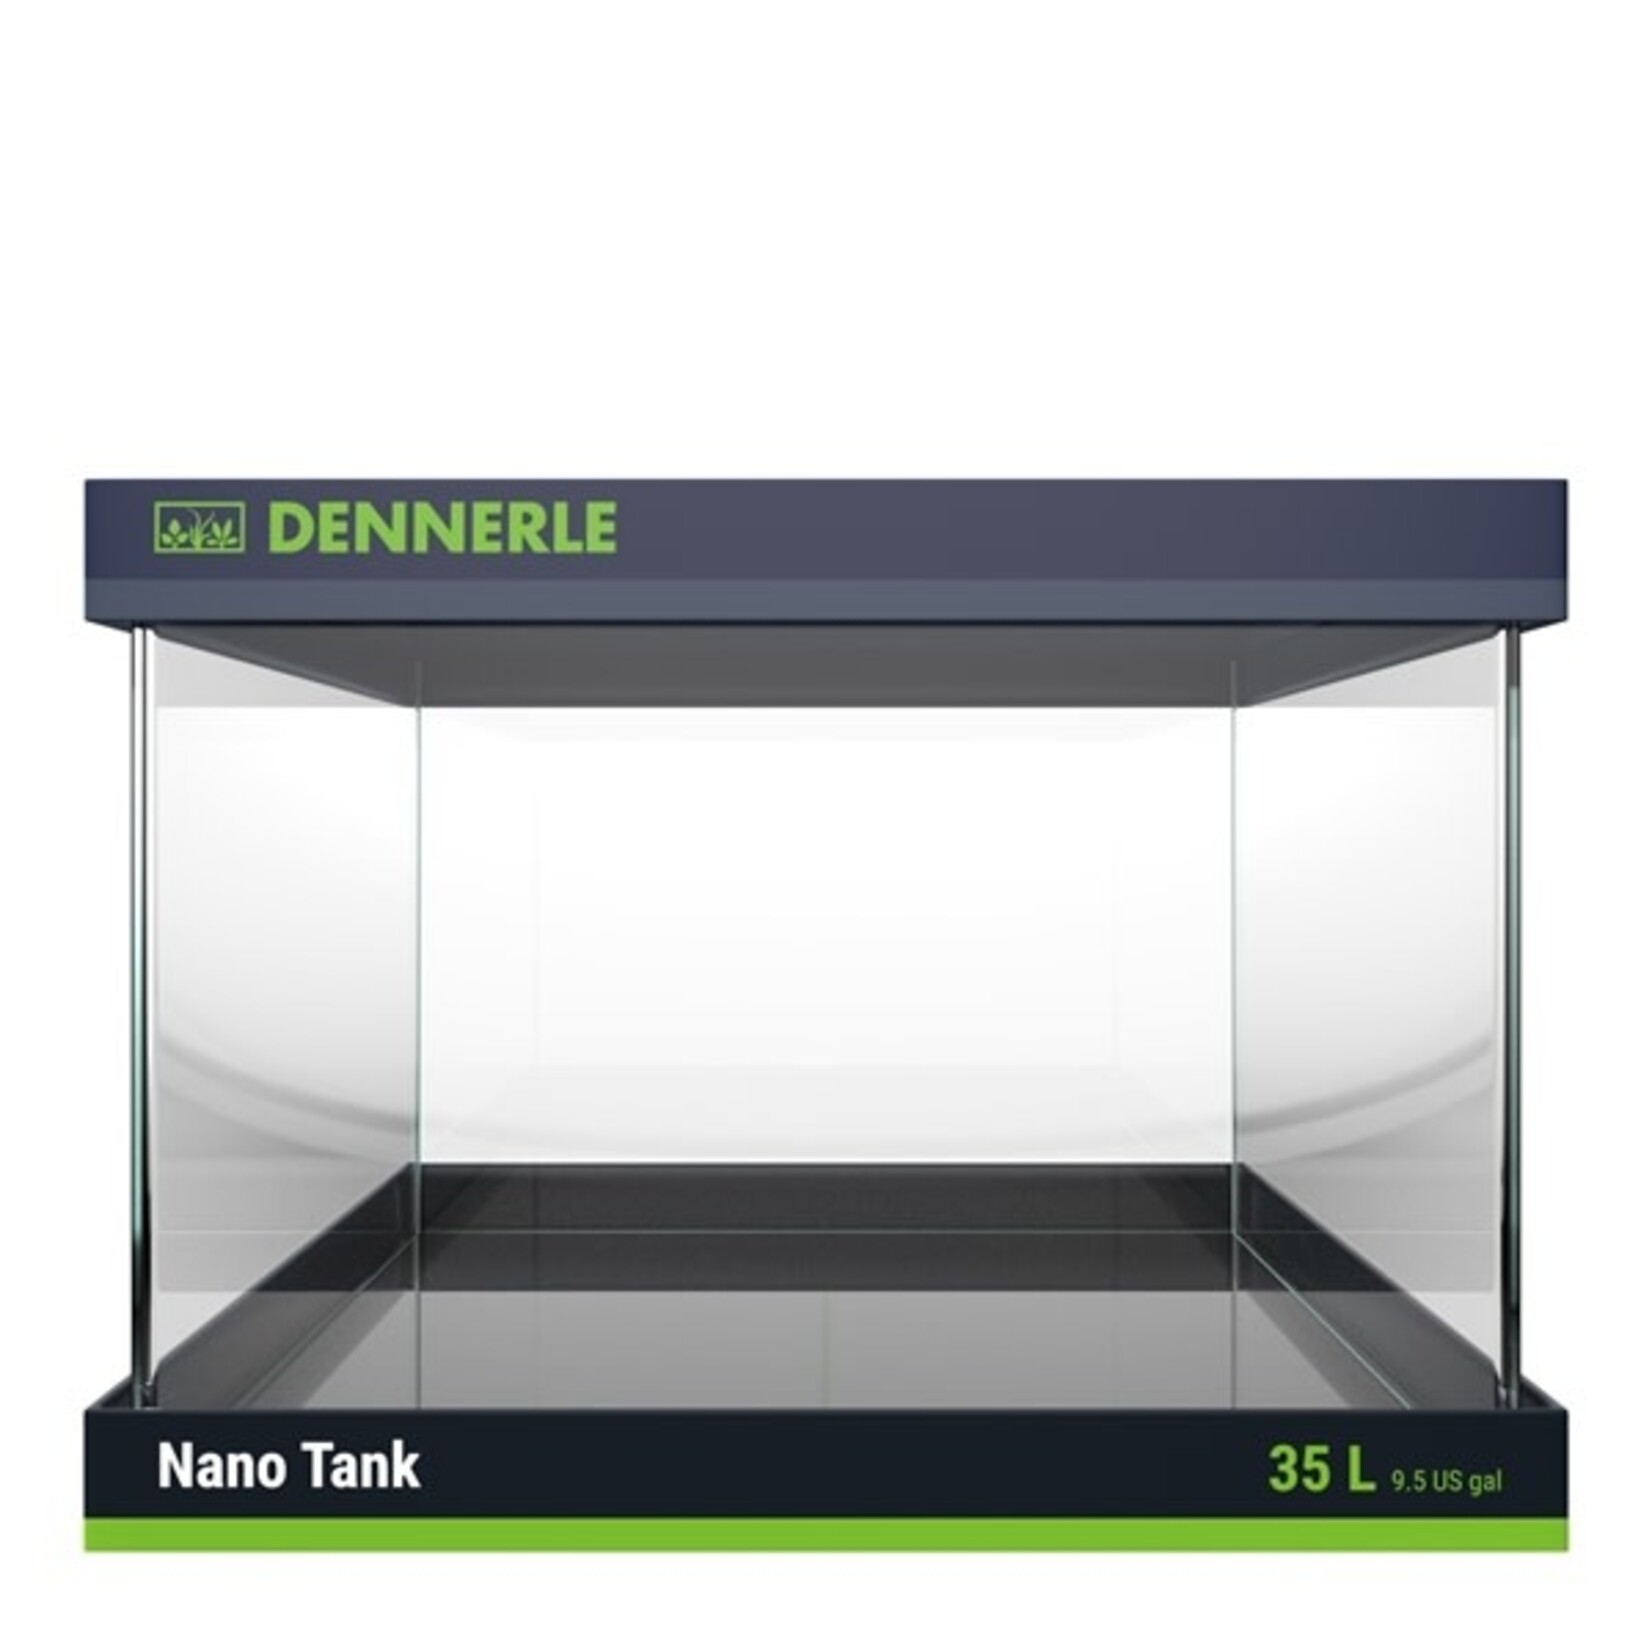 Dennerle DENNERLE NANO SCAPERS TANK 35 L